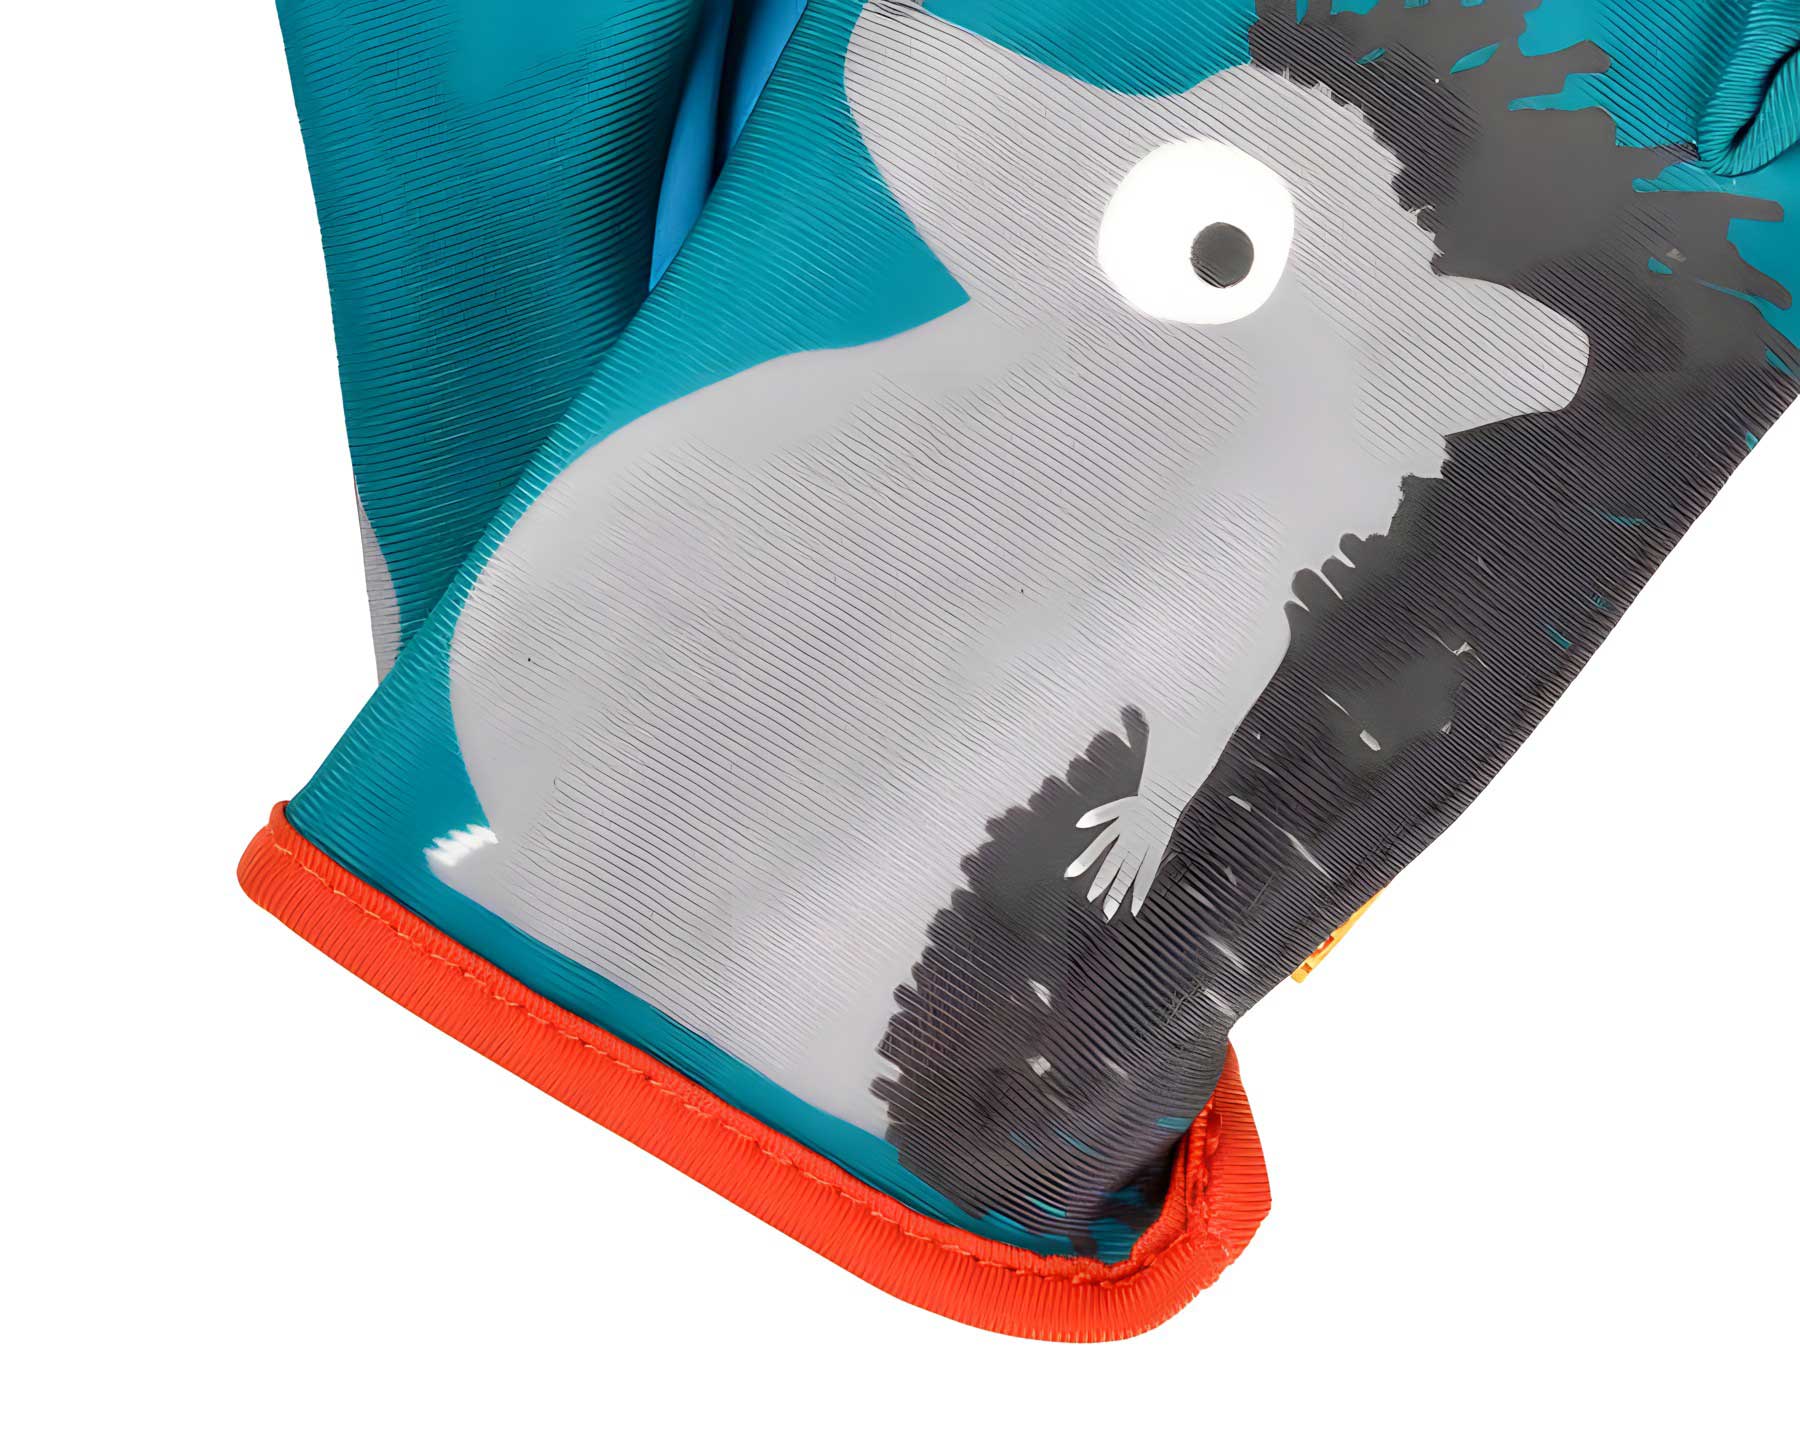 Children's gardening gloves - Hedgehog design  a quality product from the  National Trust.